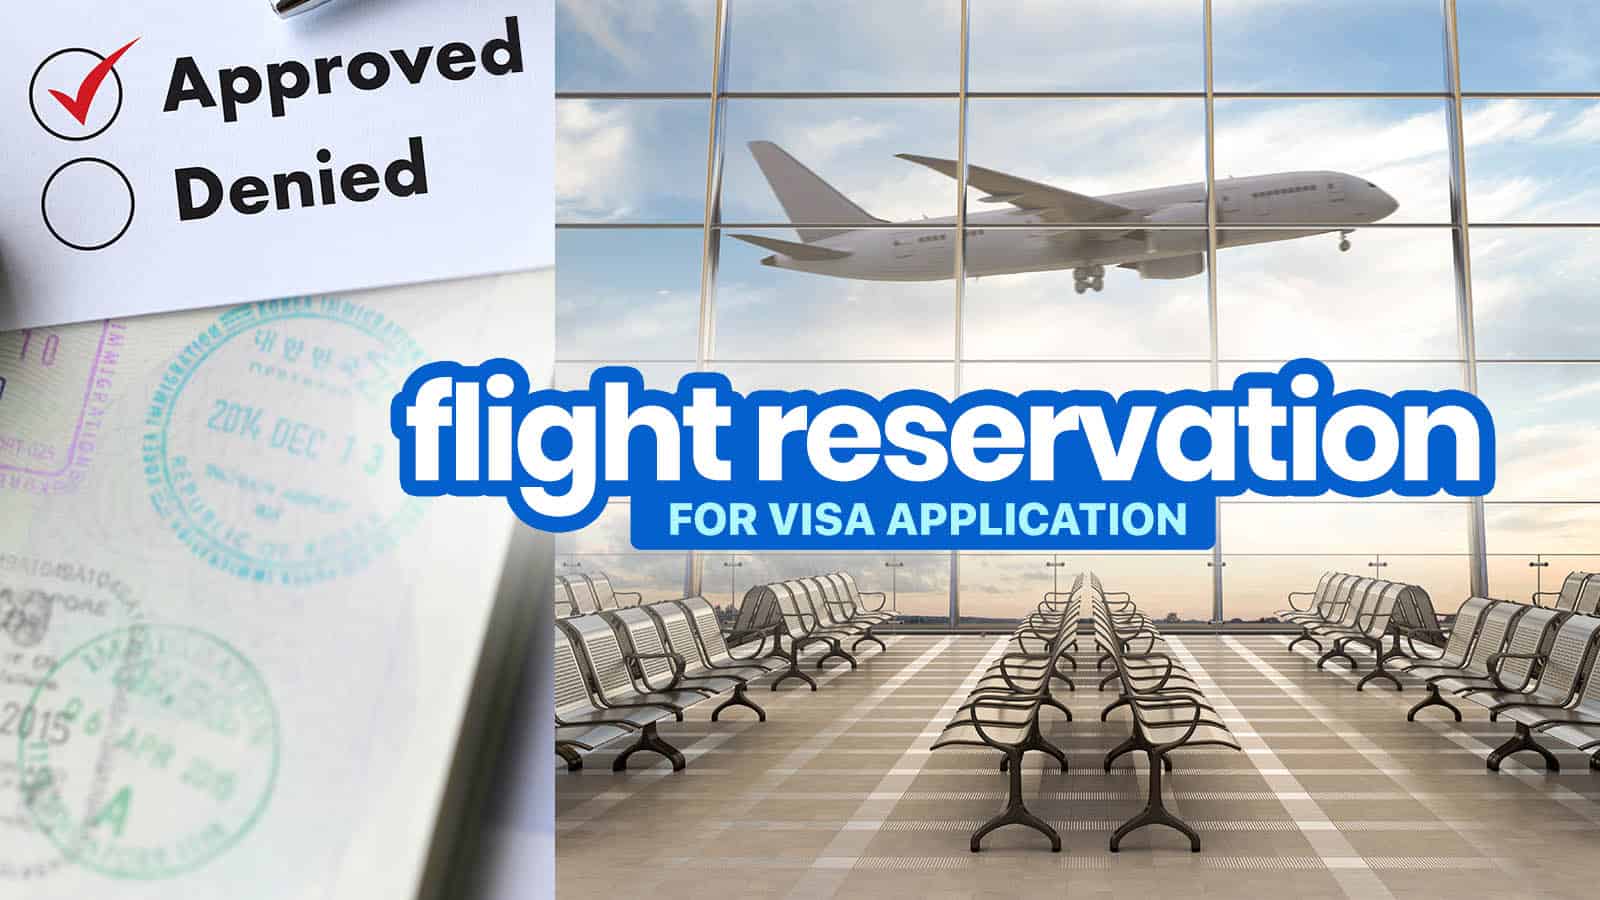 By to reservation BID flight call ticket from LRD